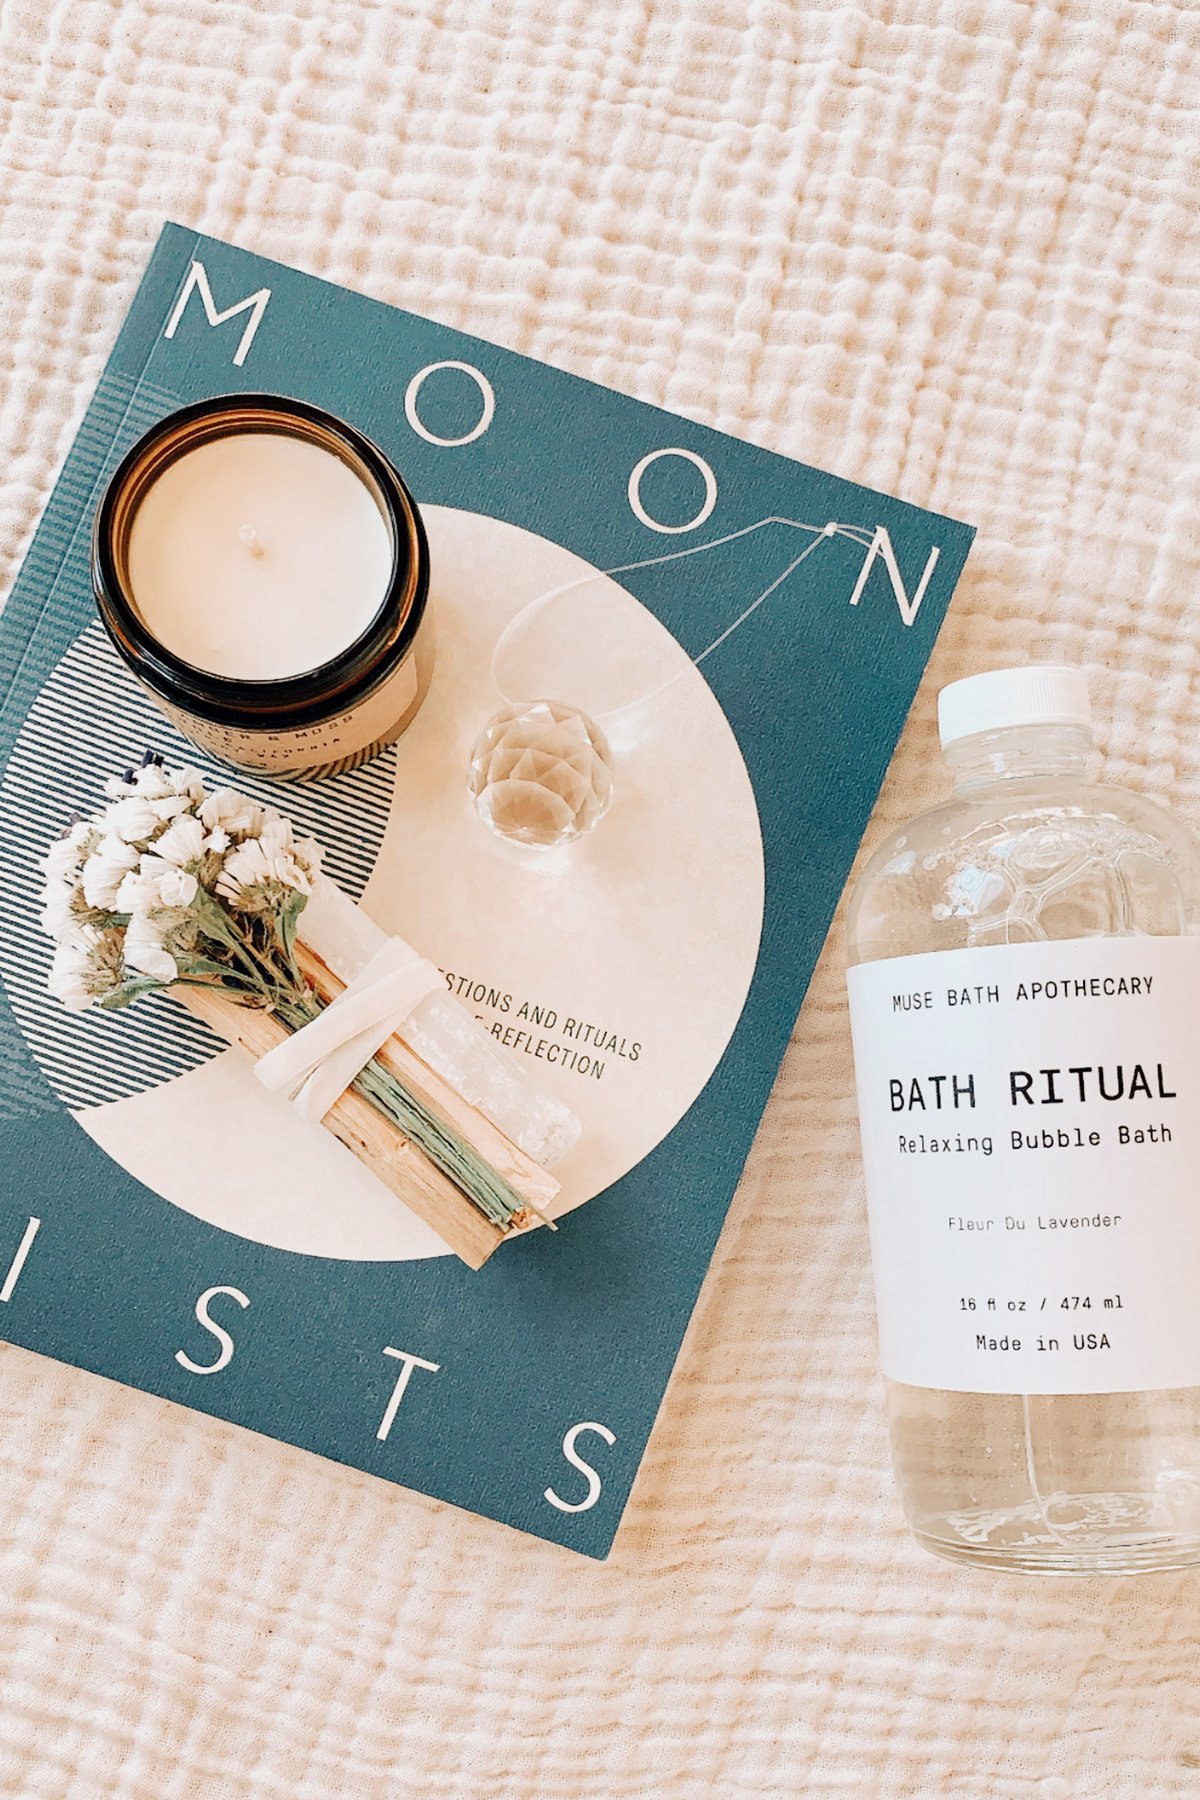 Self Care Gift Ideas: 17 Mood Boosting COVID-19 Care Packages - Eco Club